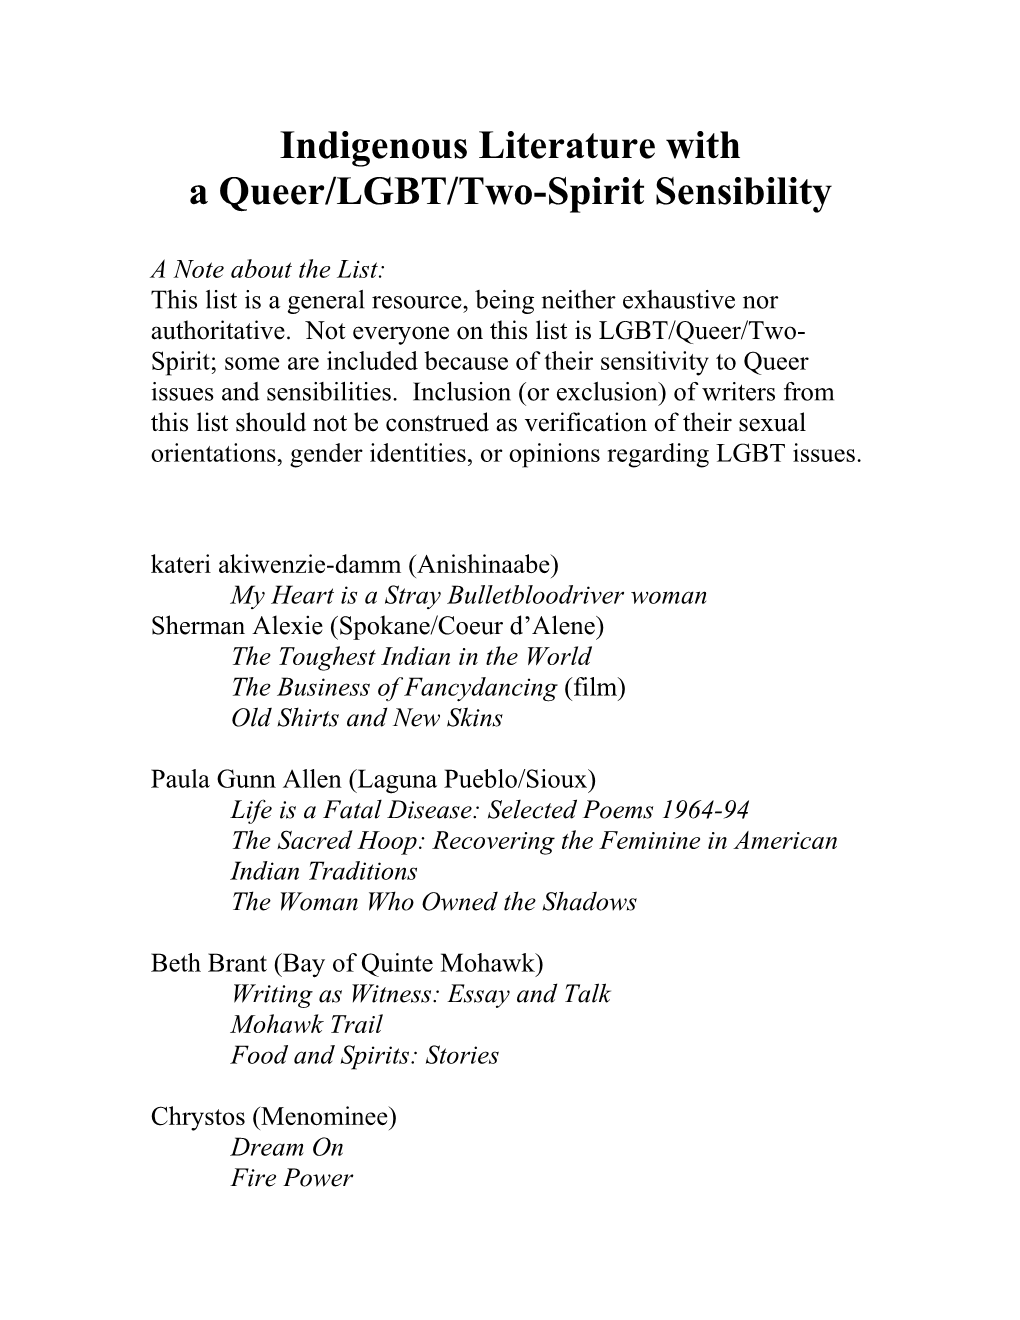 A Queer/LGBT/Two-Spirit Sensibility